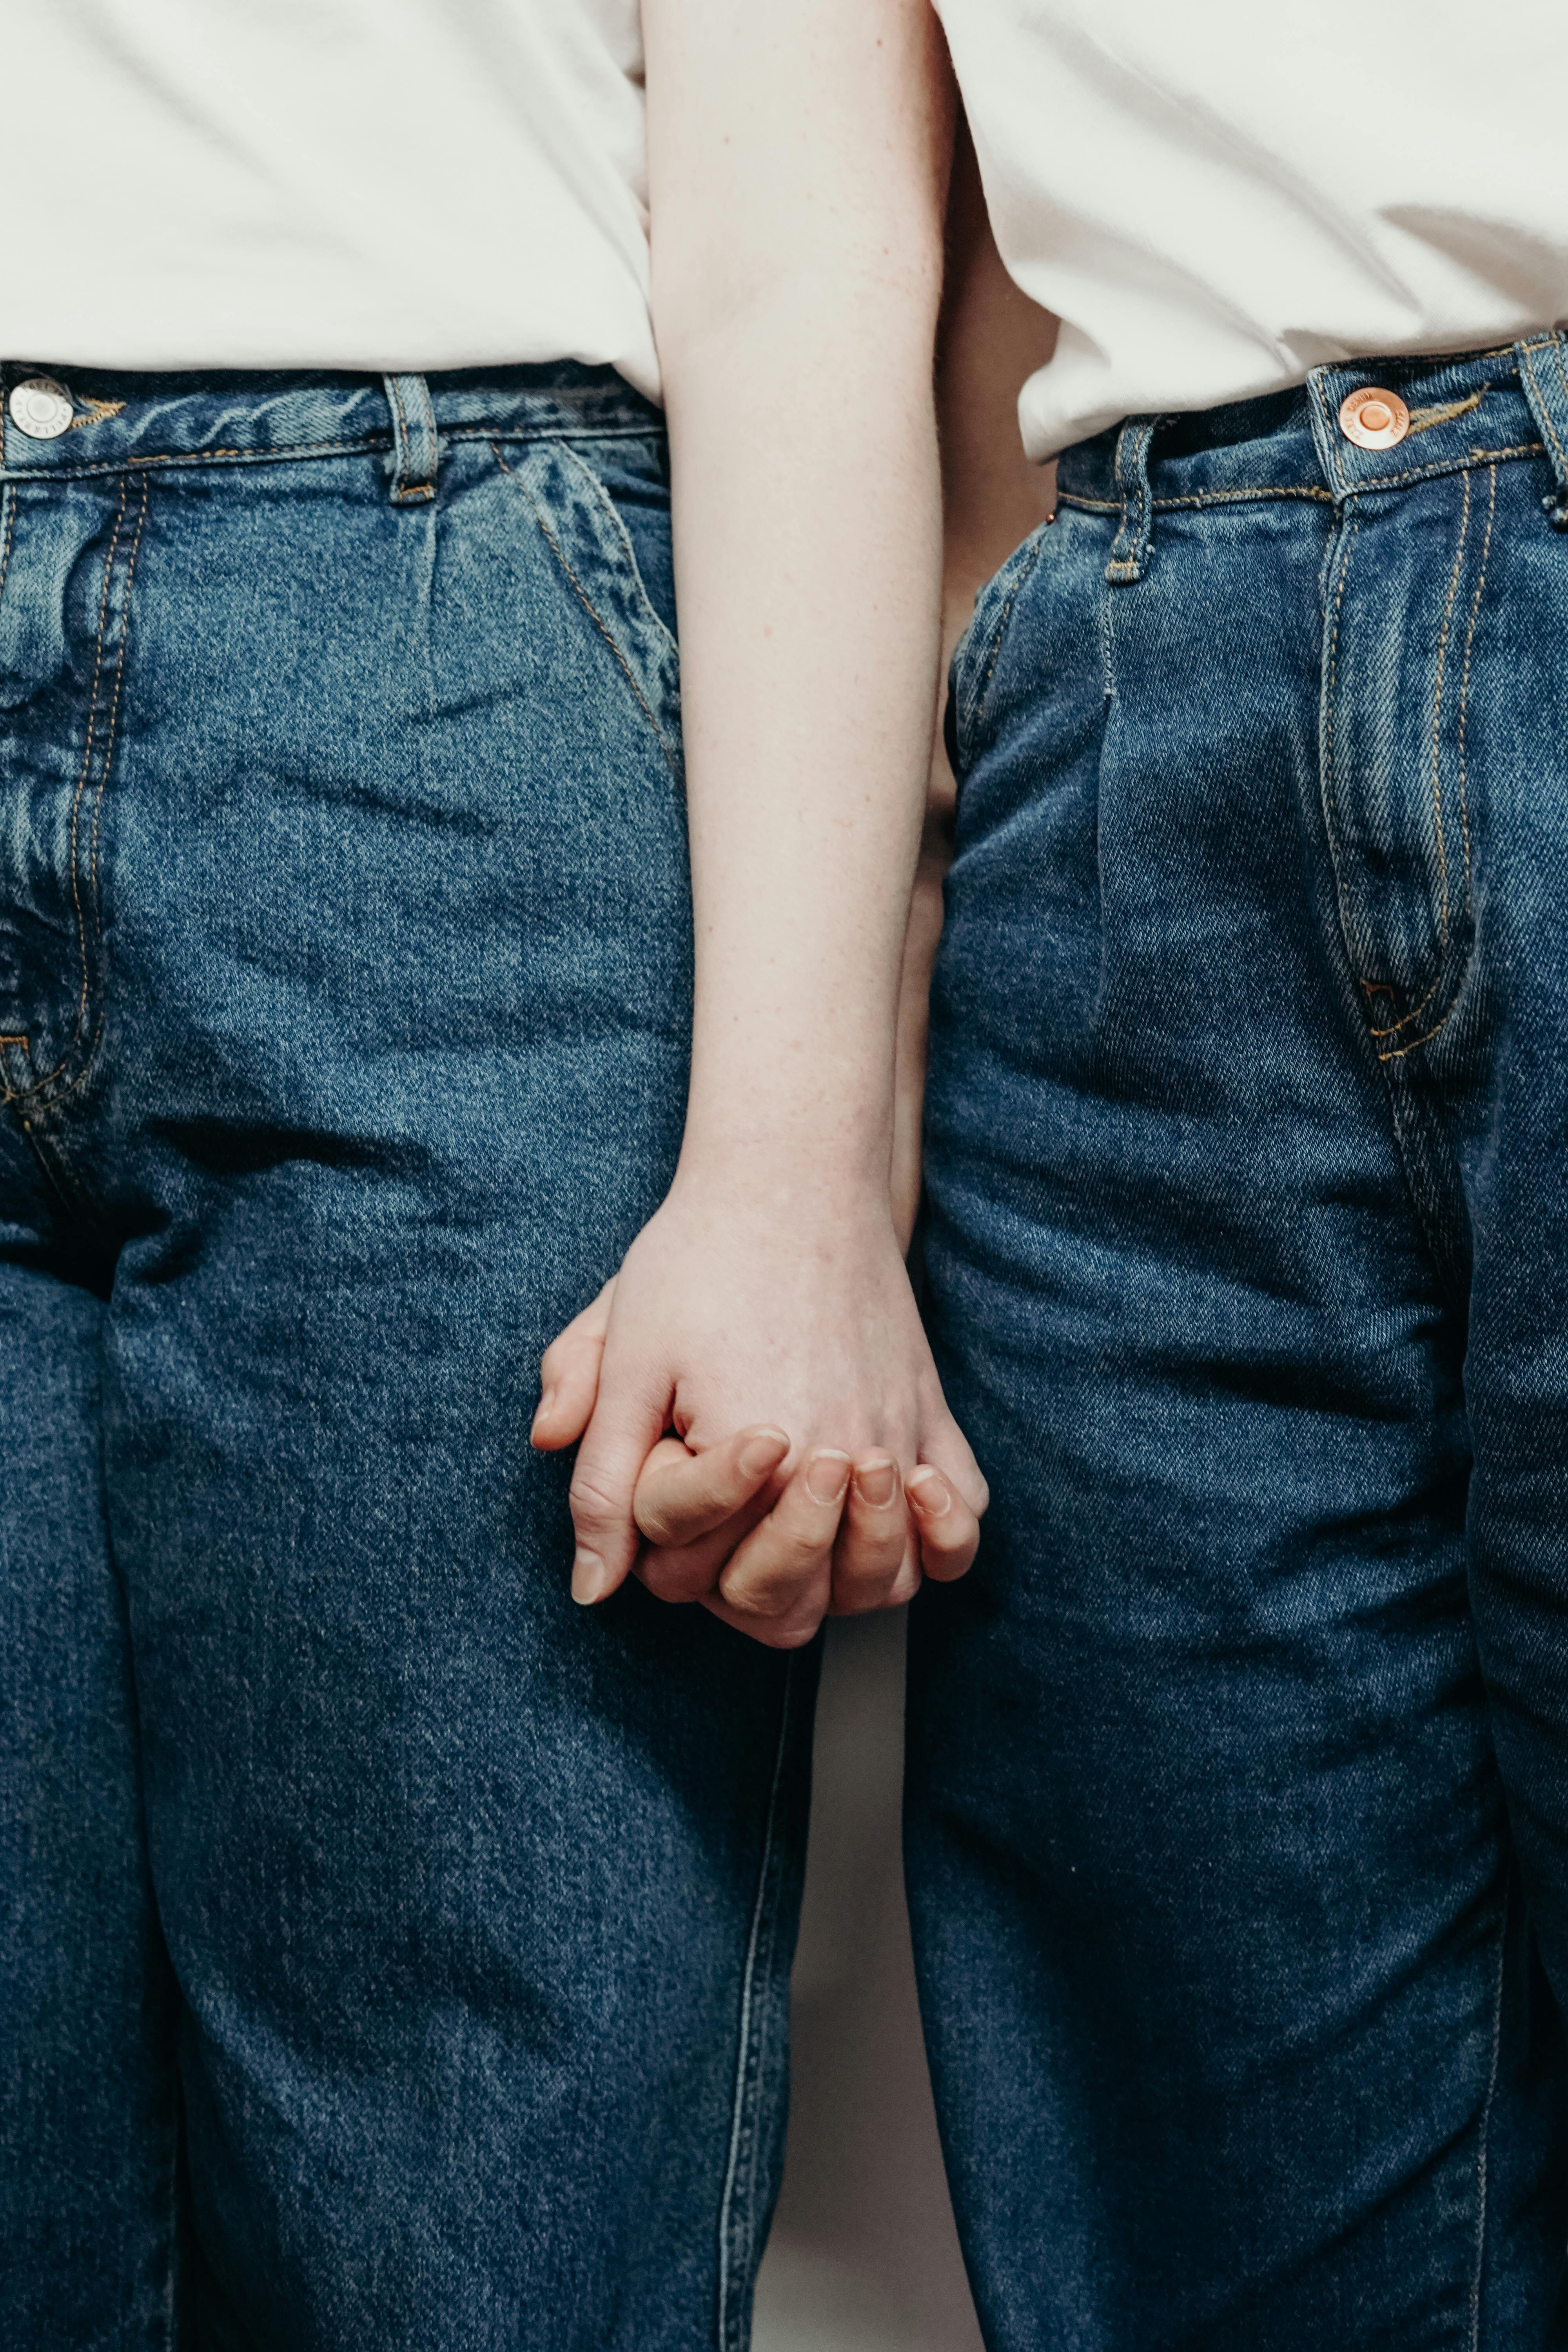 Two young women holding hands | Source: cottonbro studio on Pexels